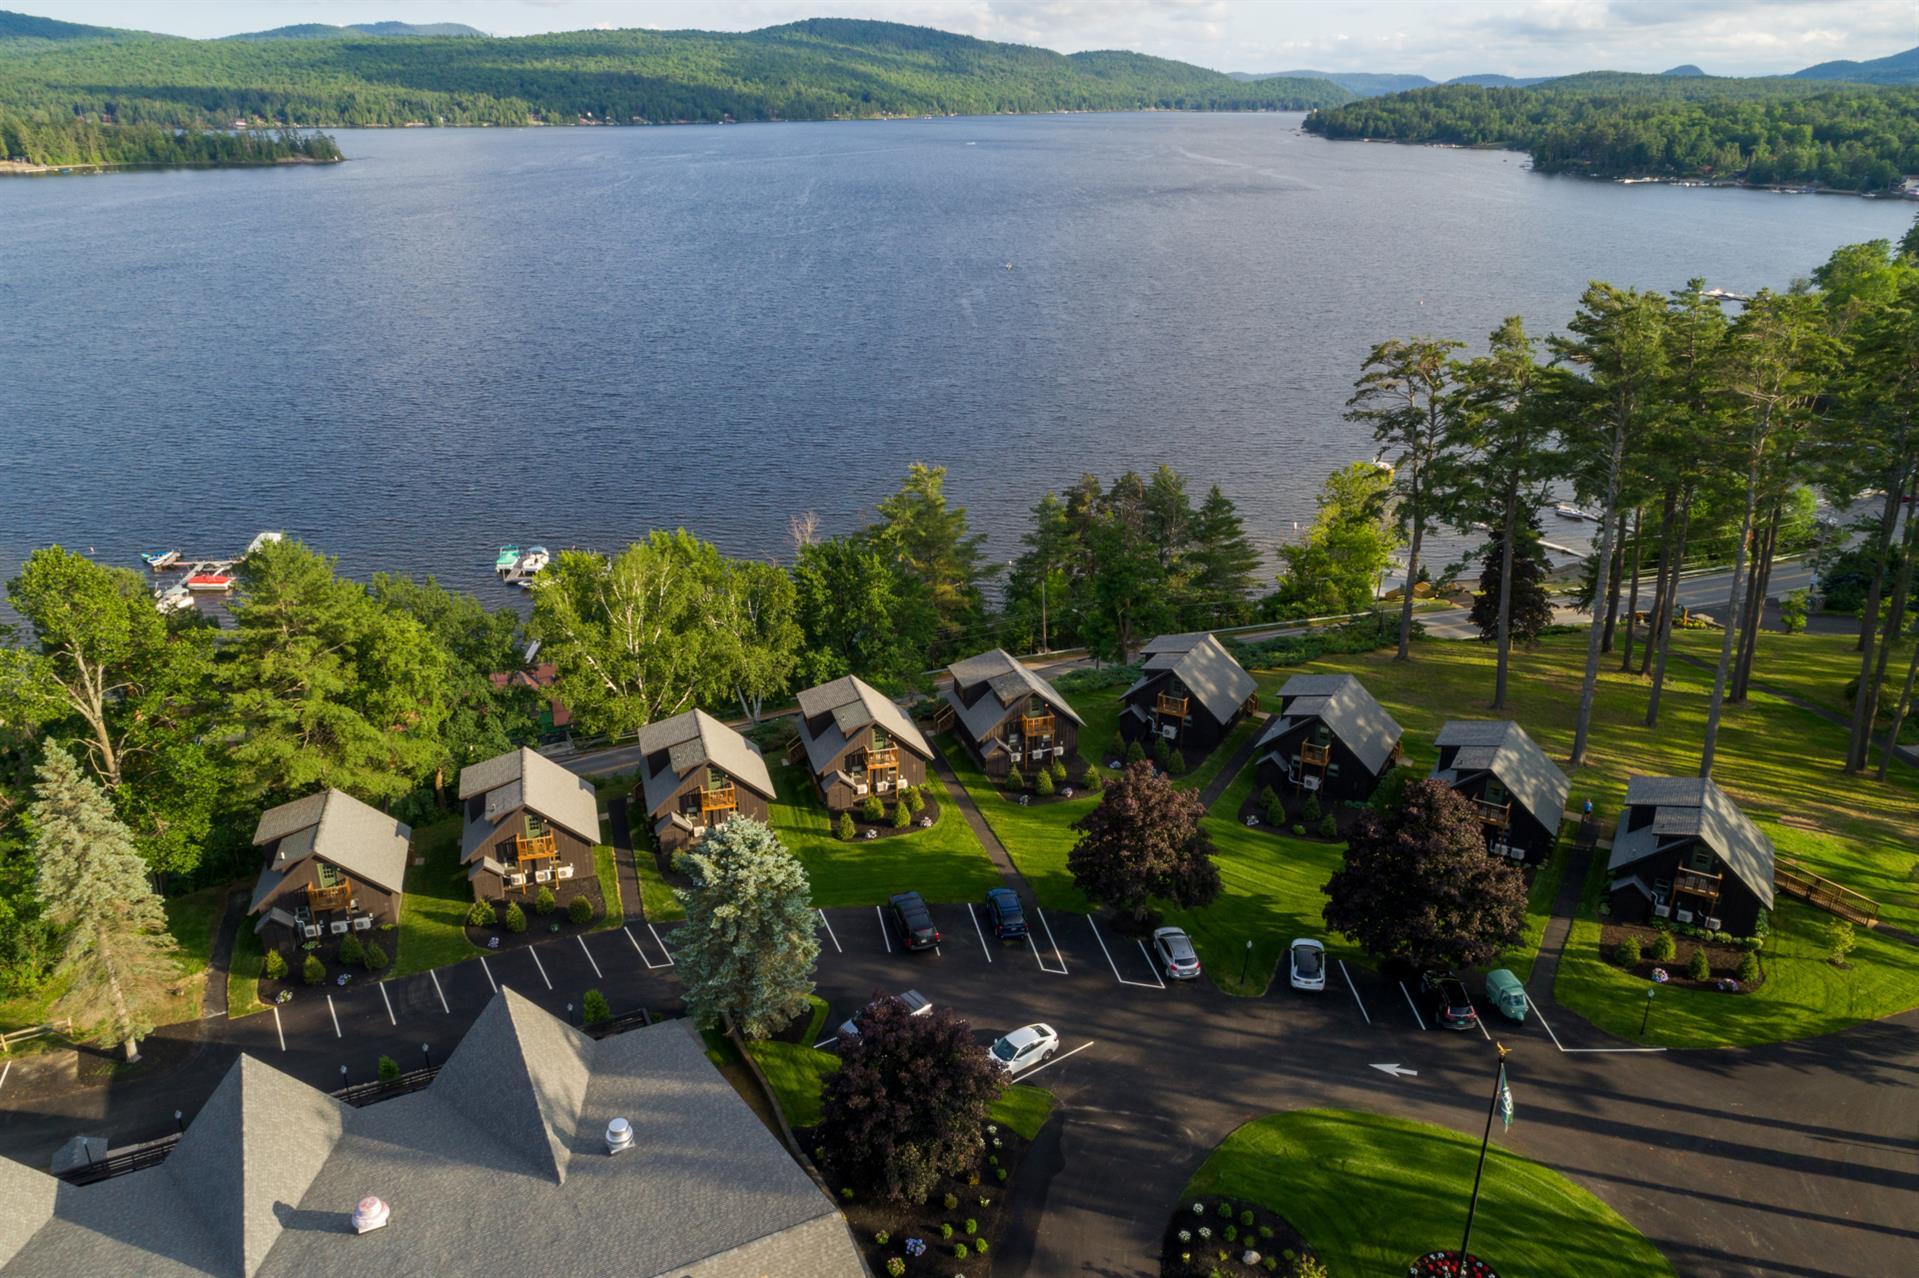 The Lodge at Schroon Lake in Schroon Lake, NY